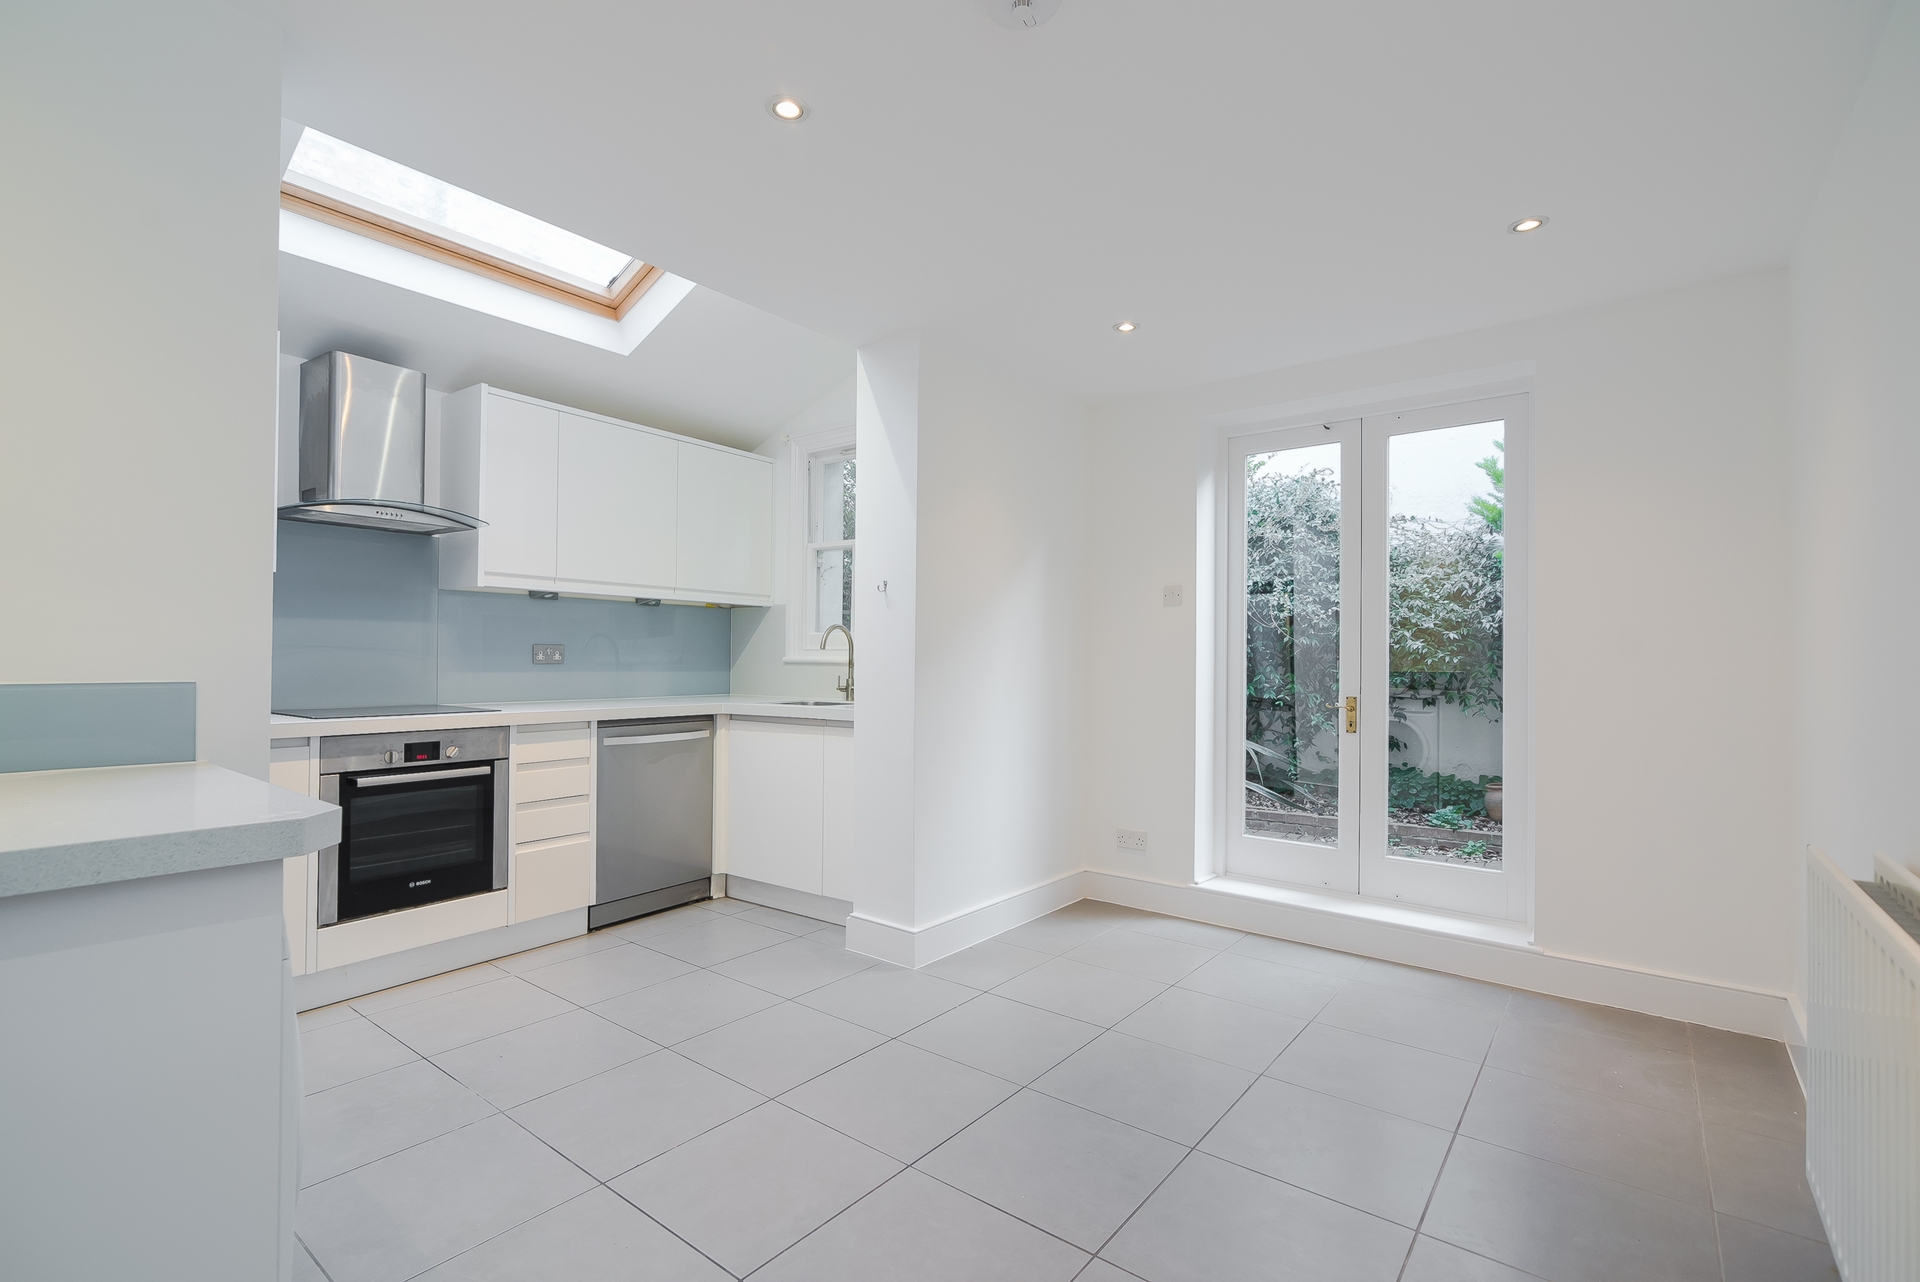 4 Bedroom House to rent in Wandsworth, London, SW18